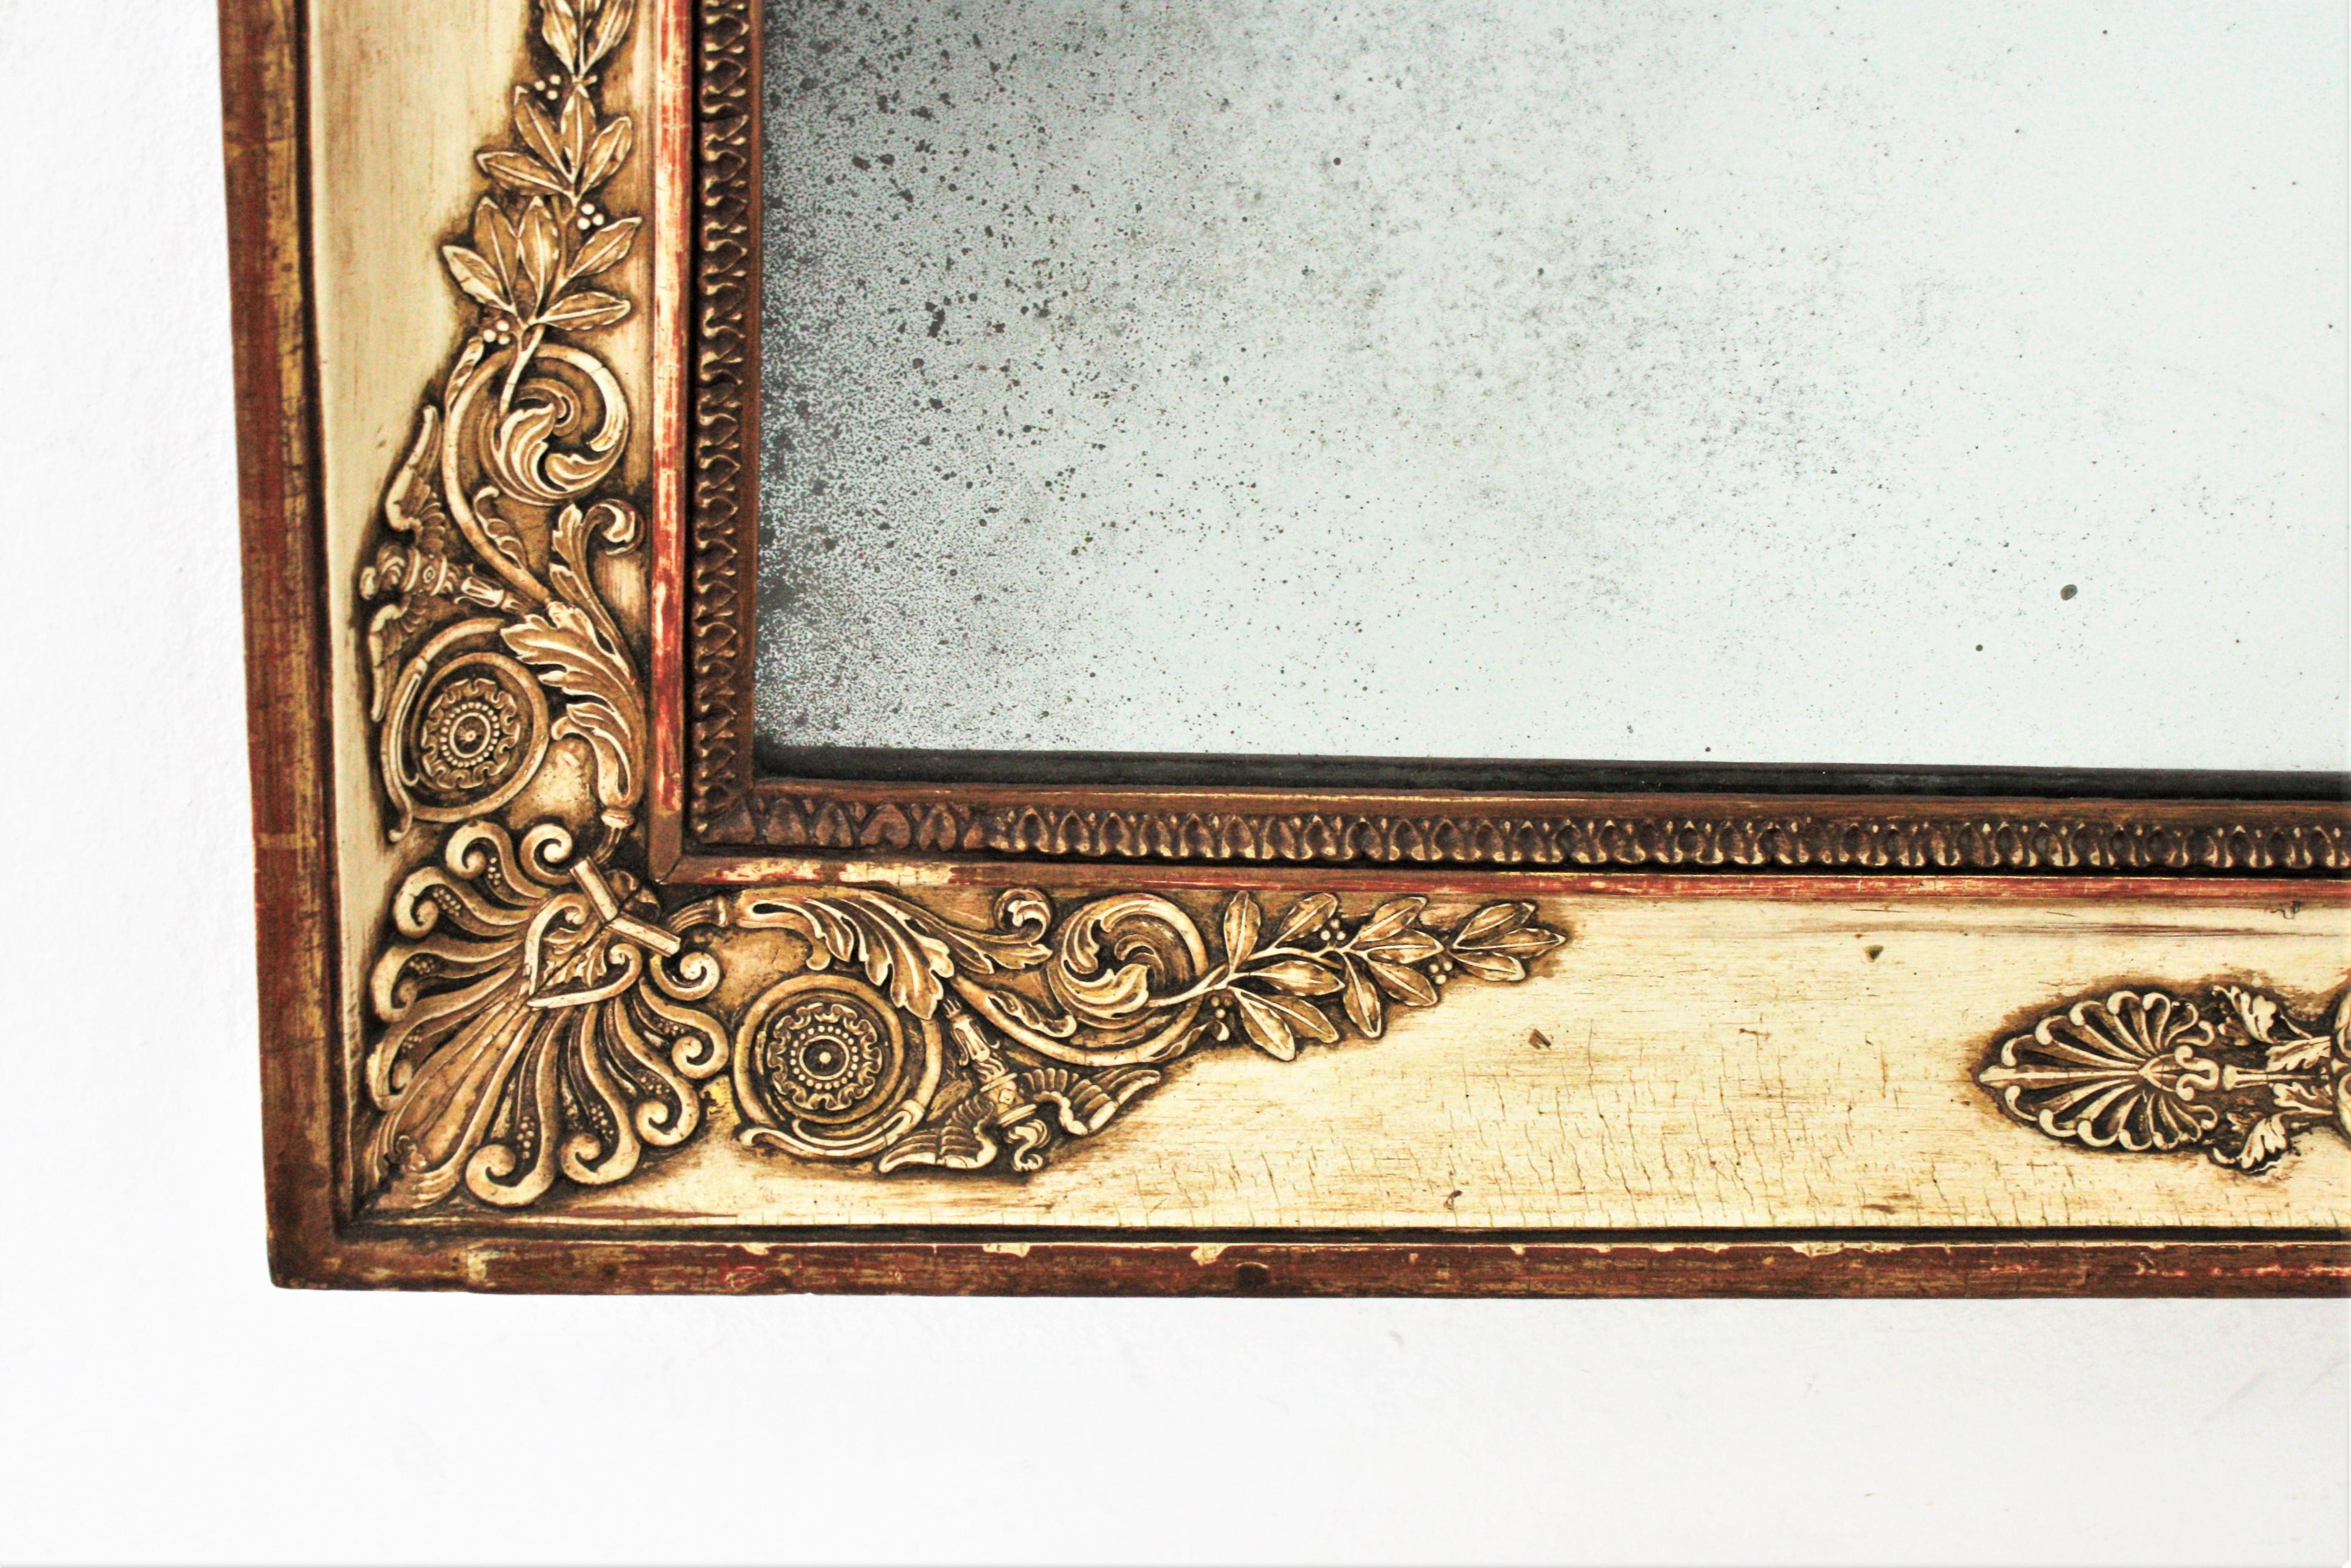 Large French Empire Parcel-Gilt and Beige Rectangular Mirror For Sale 3